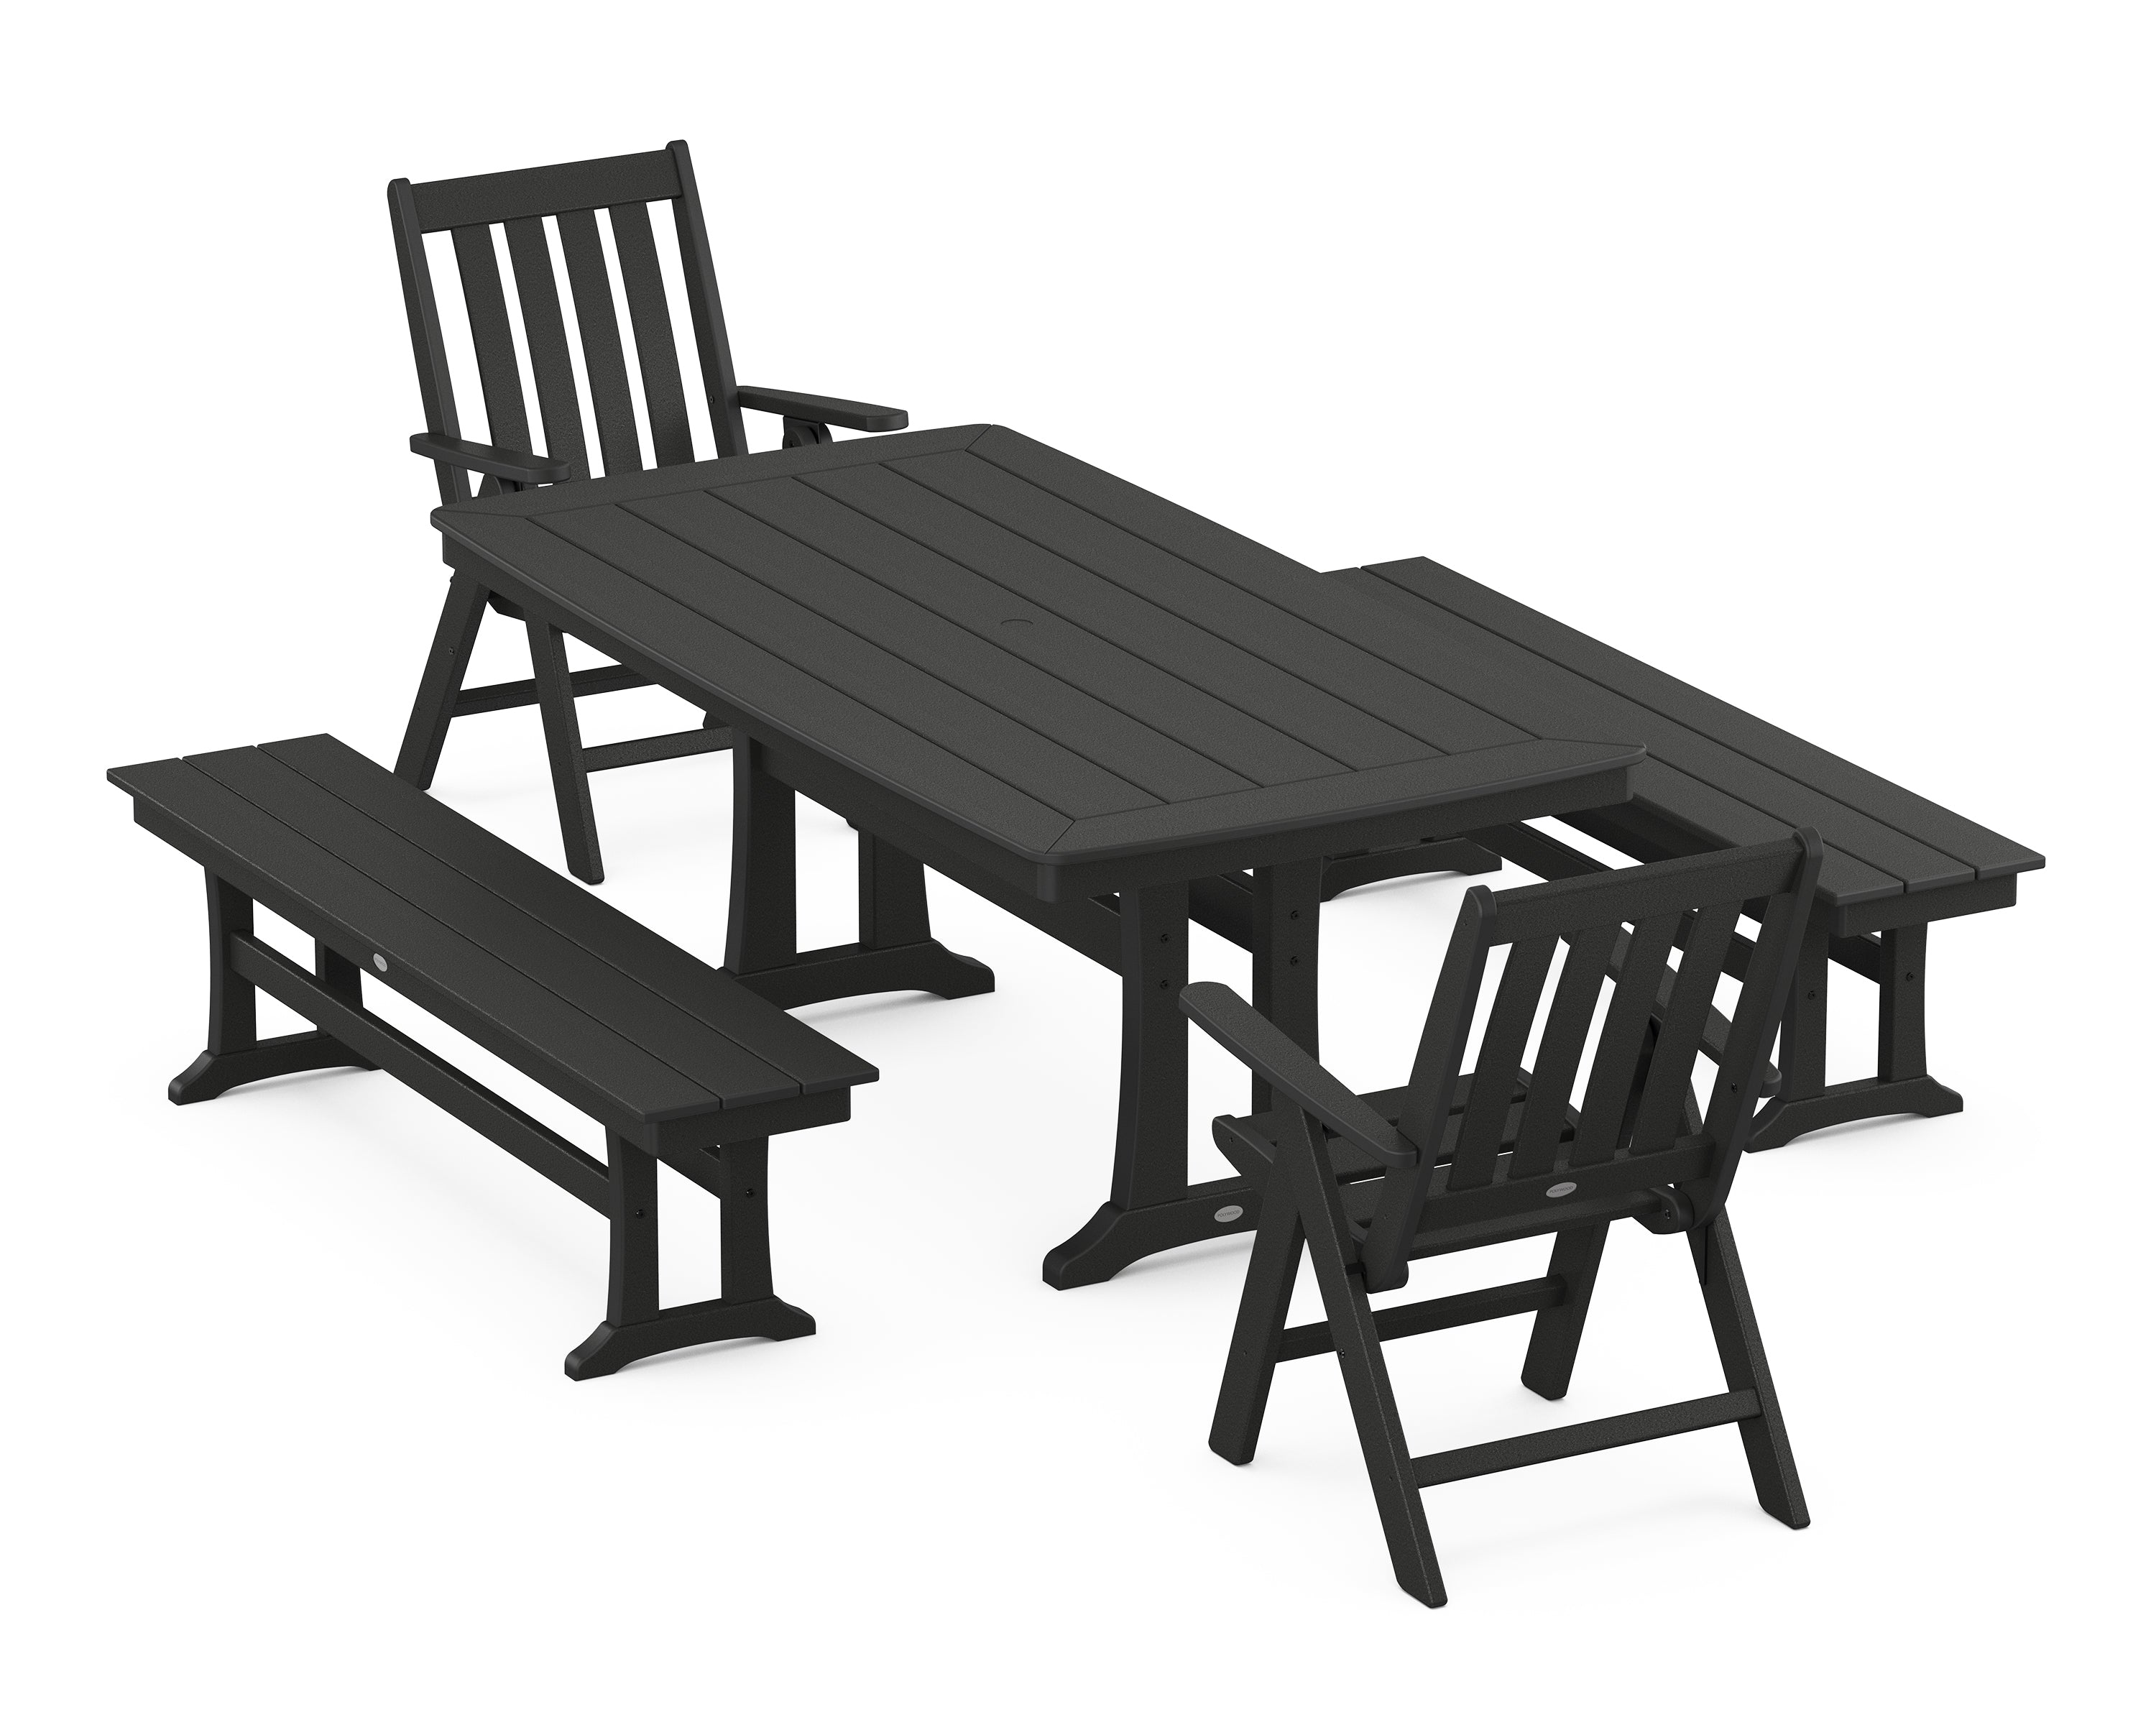 POLYWOOD® Vineyard Folding Chair 5-Piece Dining Set with Trestle Legs and Benches in Black